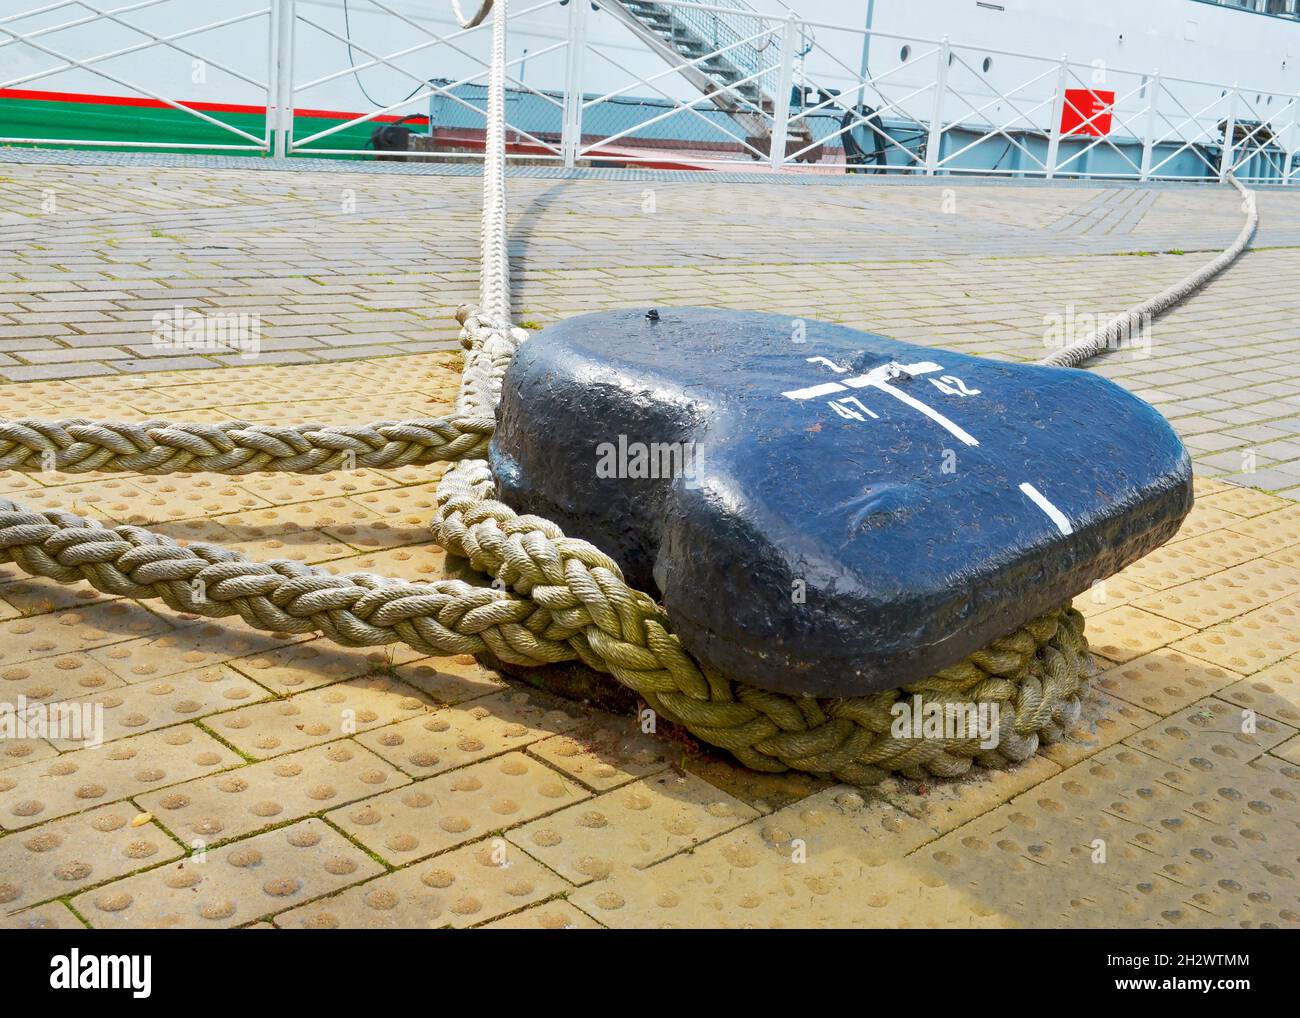 A single mooring device with coiled ropes keeps the ship on the dock. close-up Stock Photo